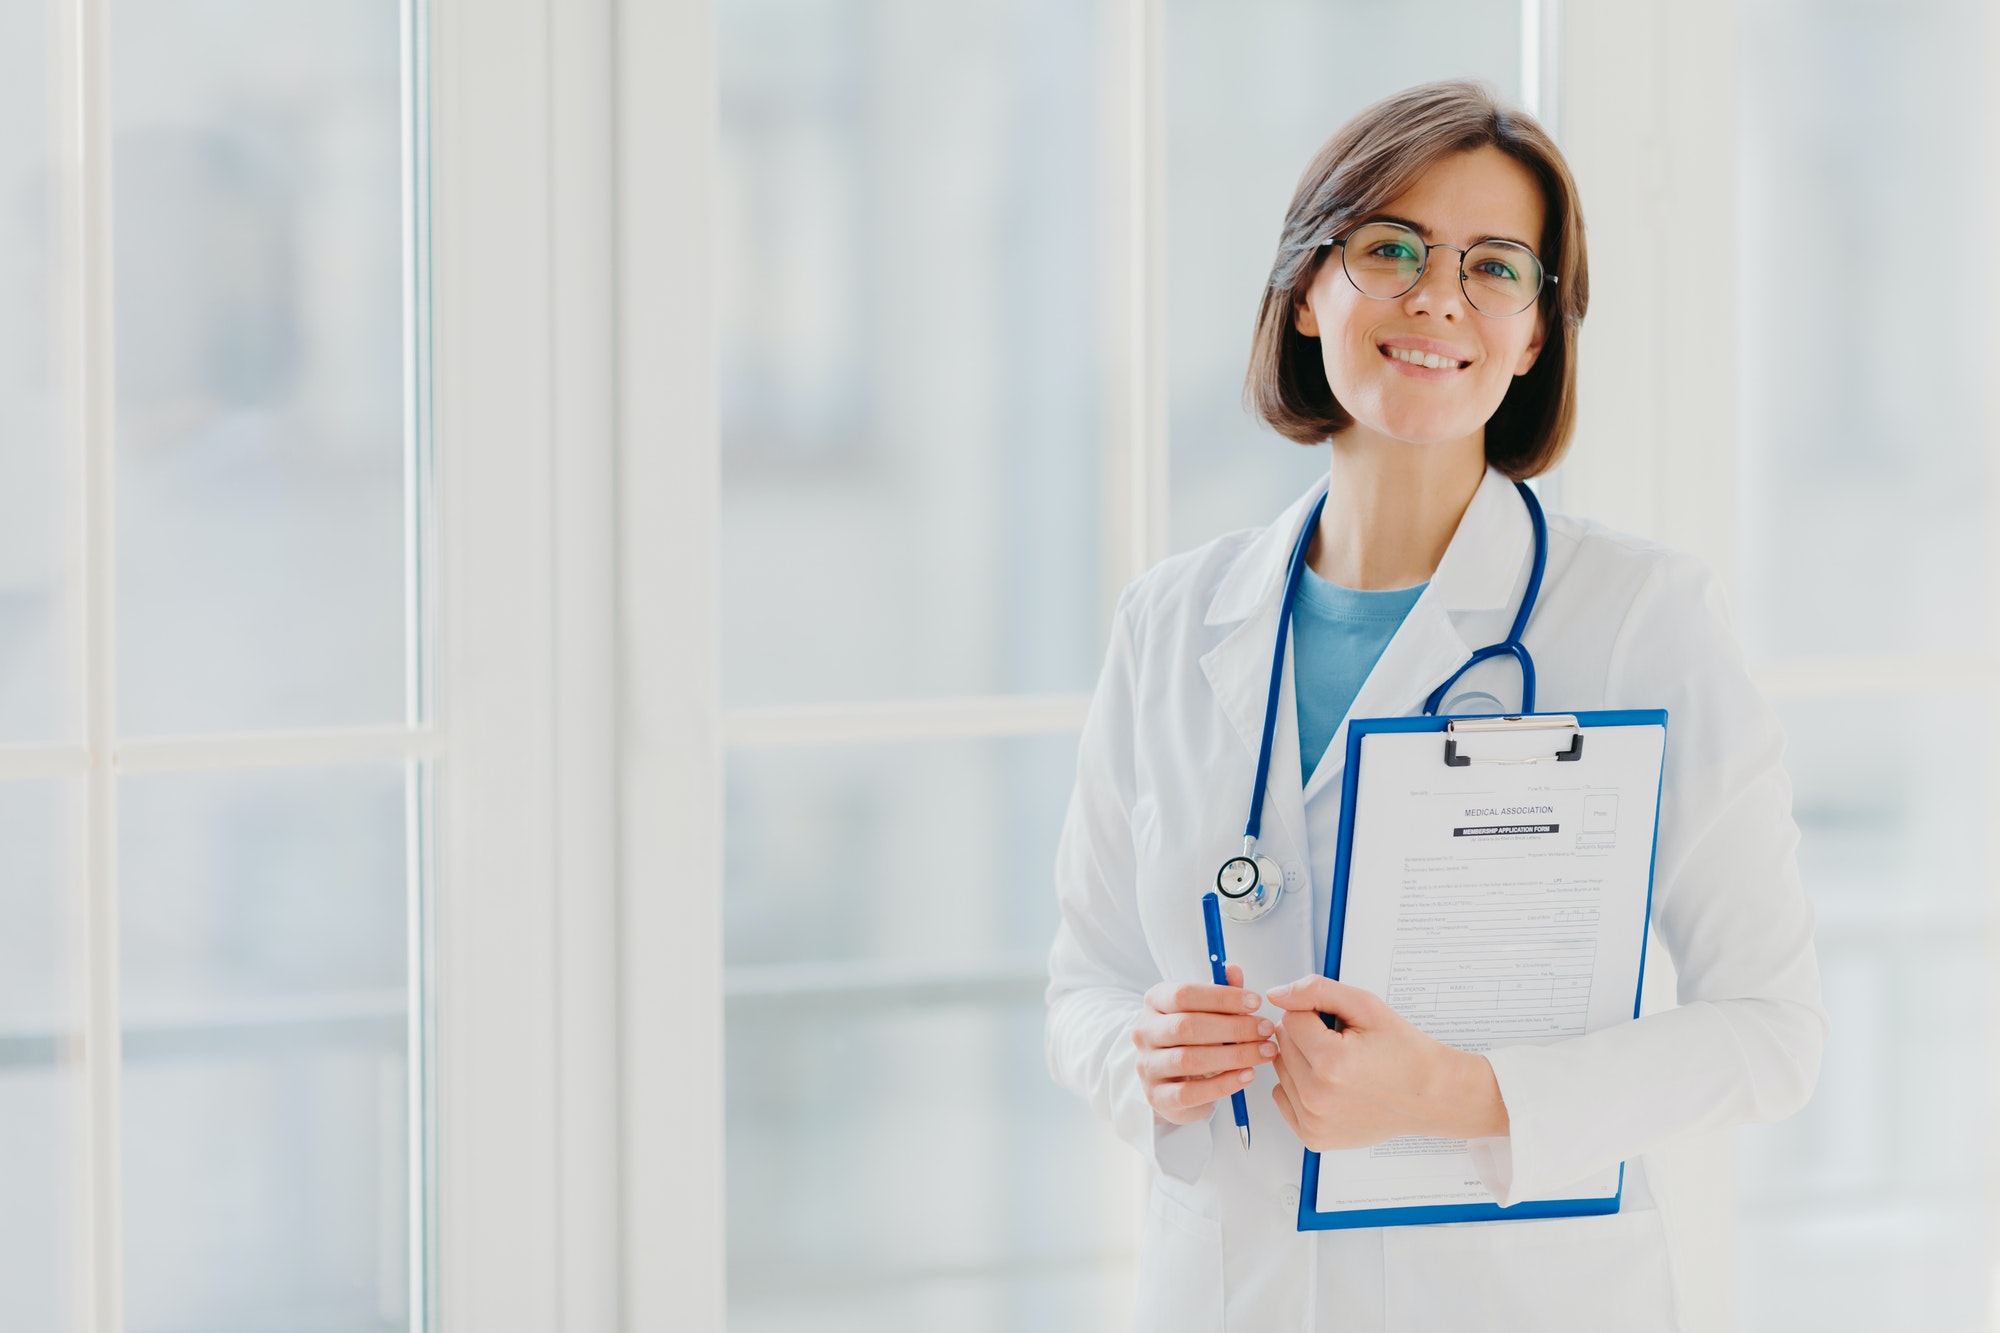 Woman doctor stands with clipboard, fills up application form, holds pen, smiles positively